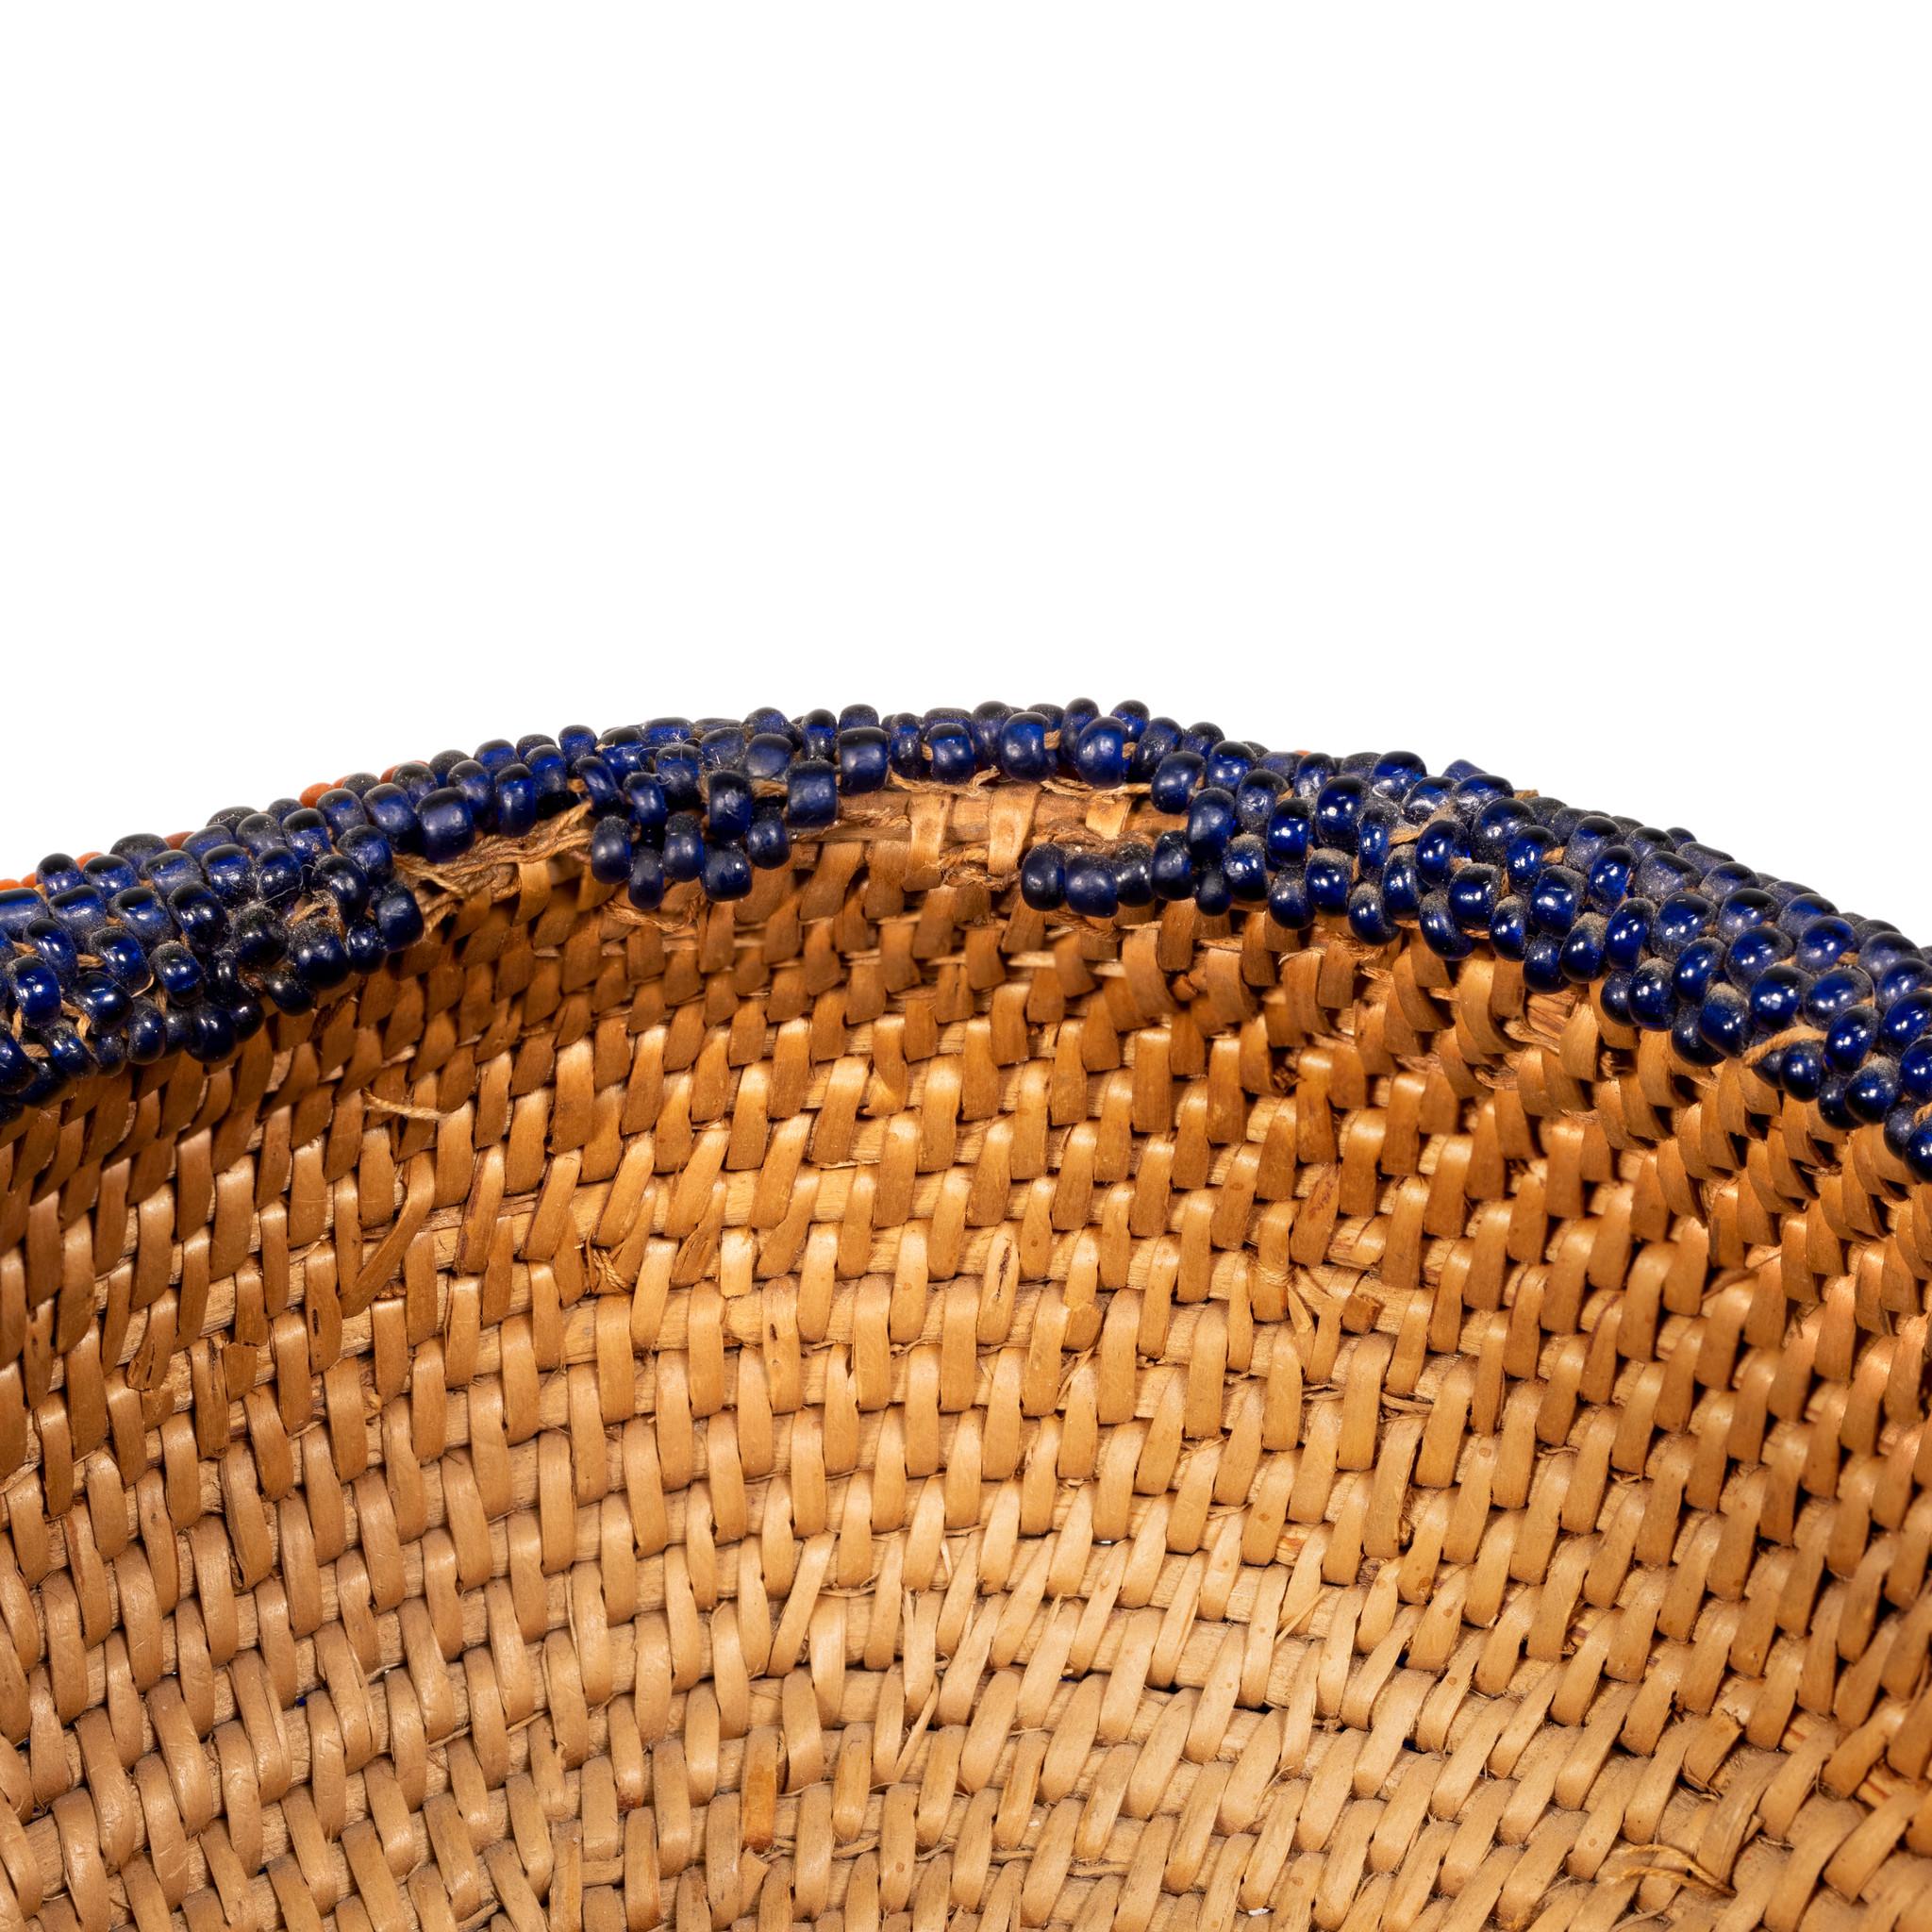 Fully beaded single rod Washoe basket with vibrant colors of blue, yellow and orange inside and out.

Period: circa 1900-1920
Origin: Washoe
Size: 2 1/2